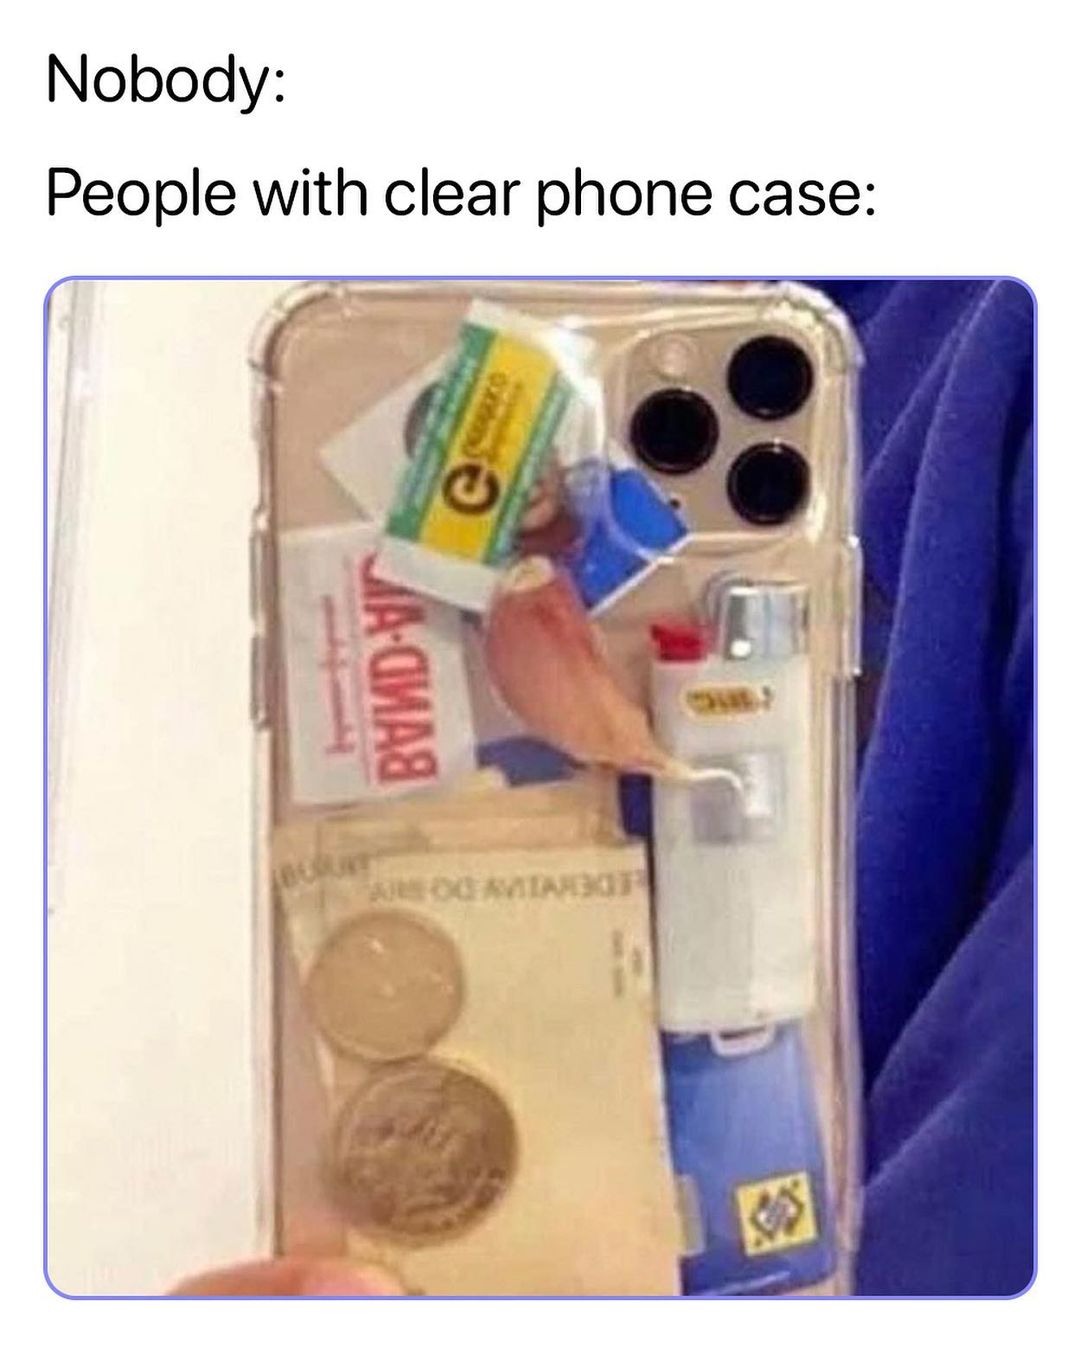 Nobody: People with clear phone case: